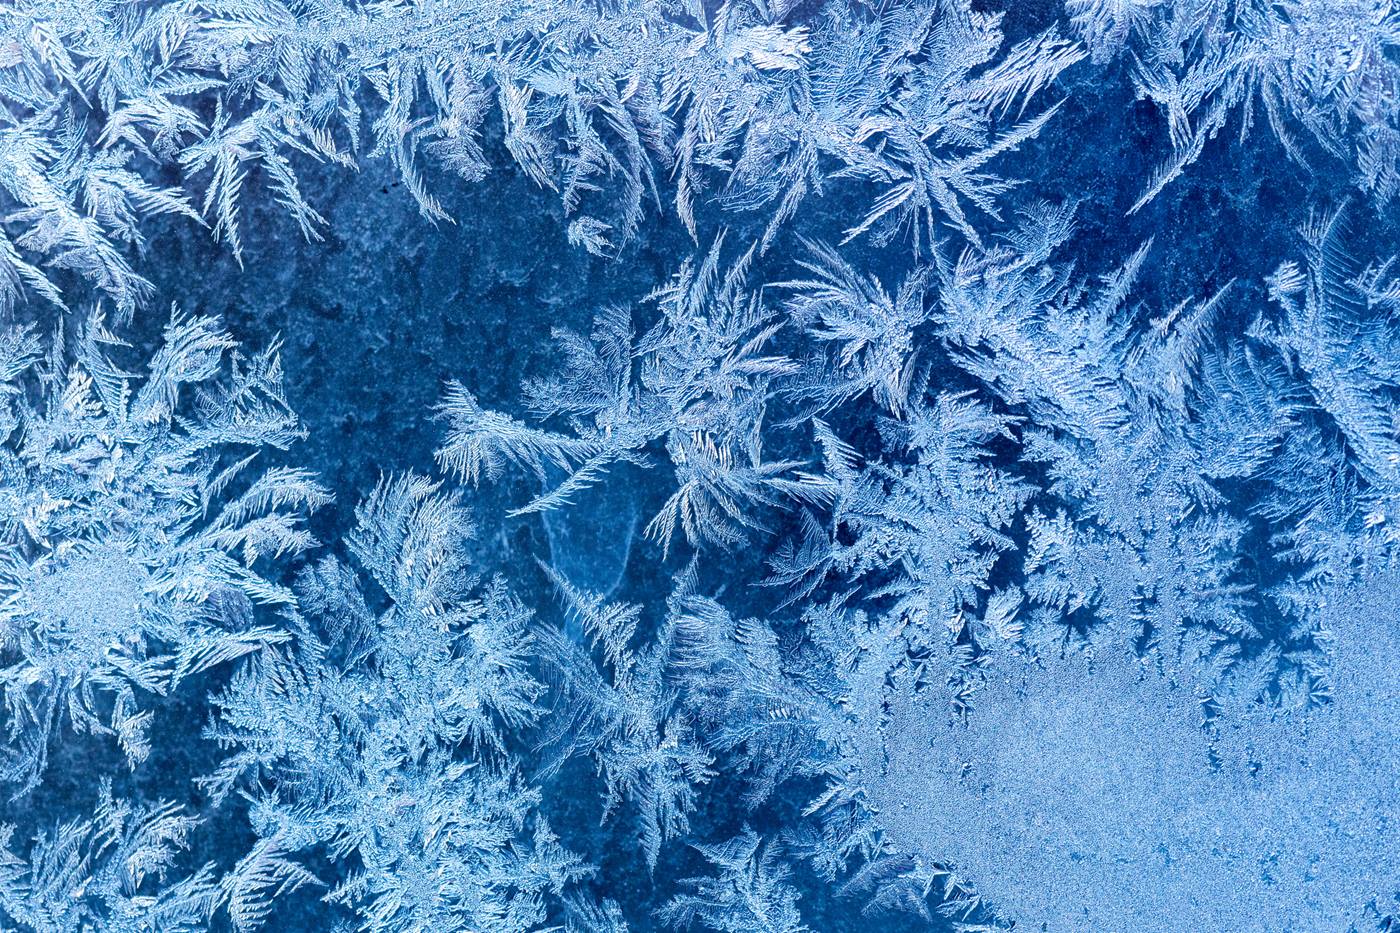 Blue ice crystals 